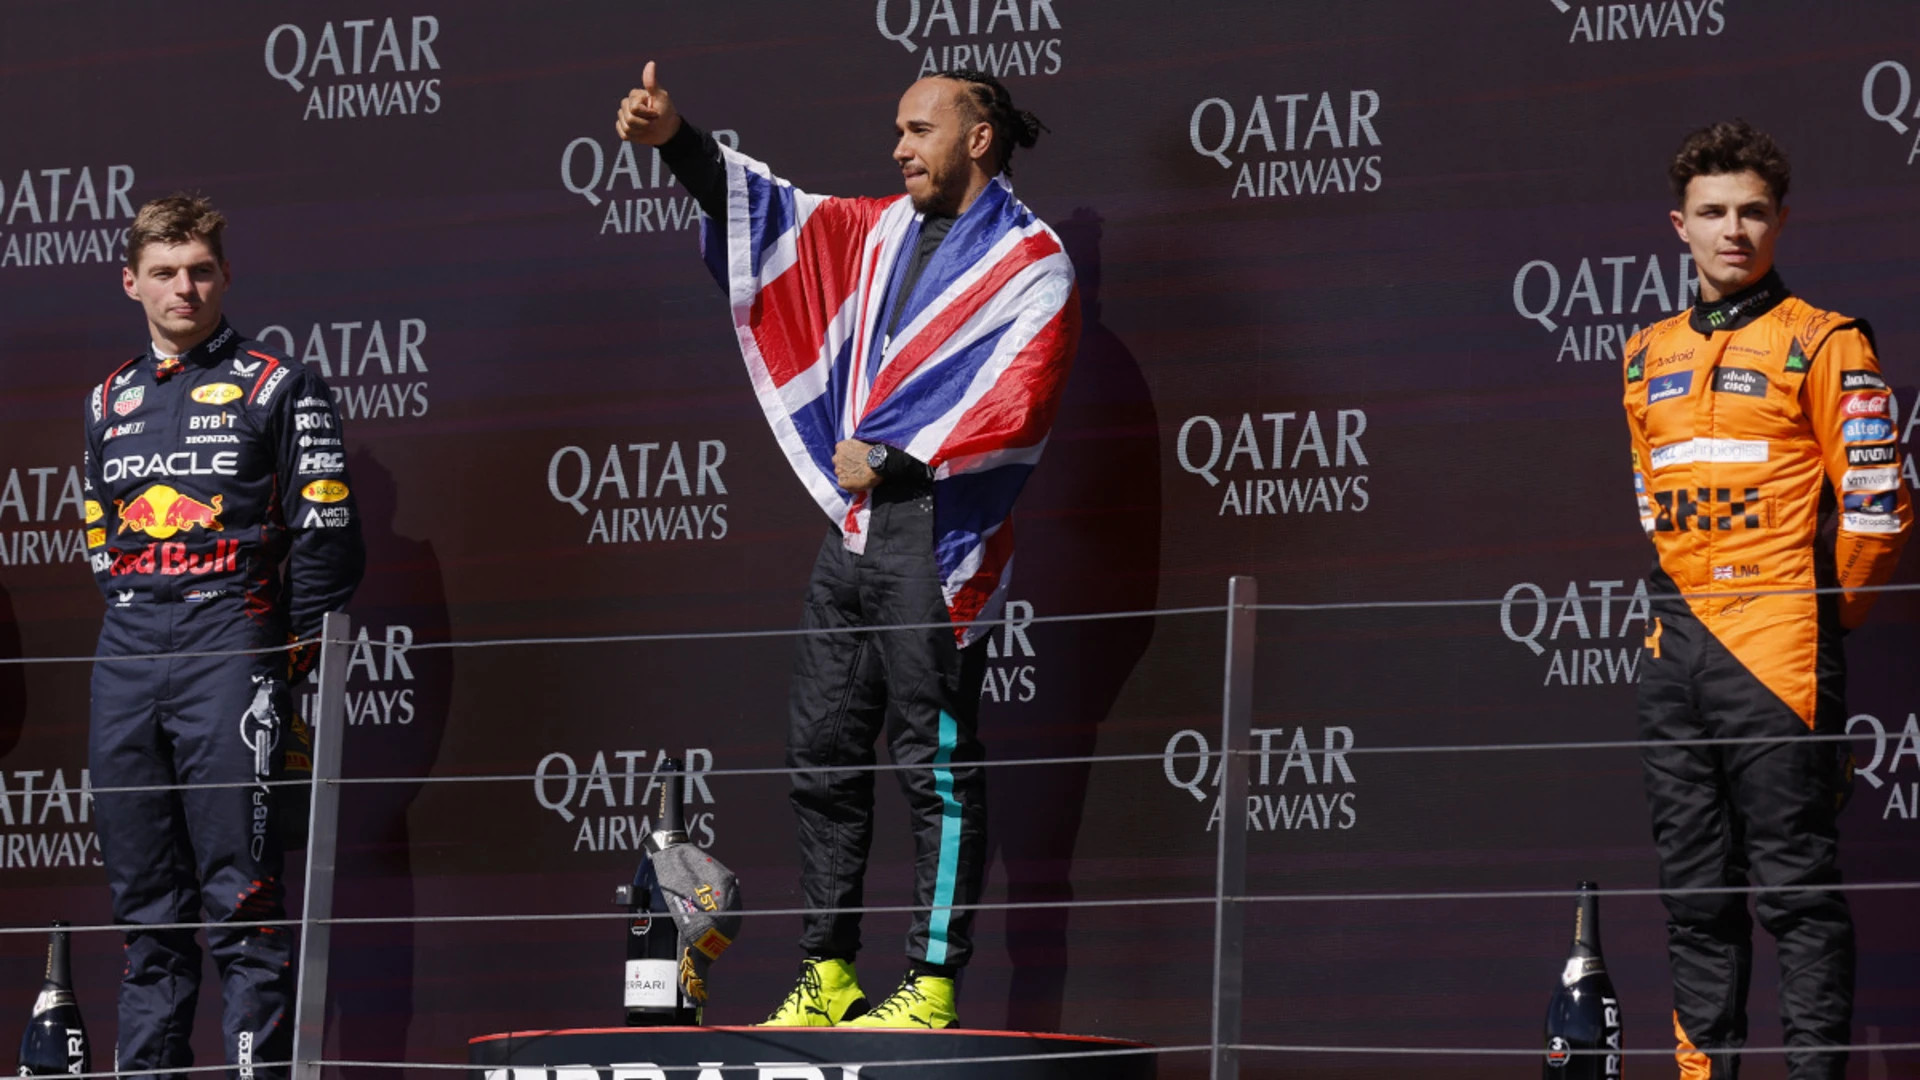 Hamilton ends win drought with record ninth British victory